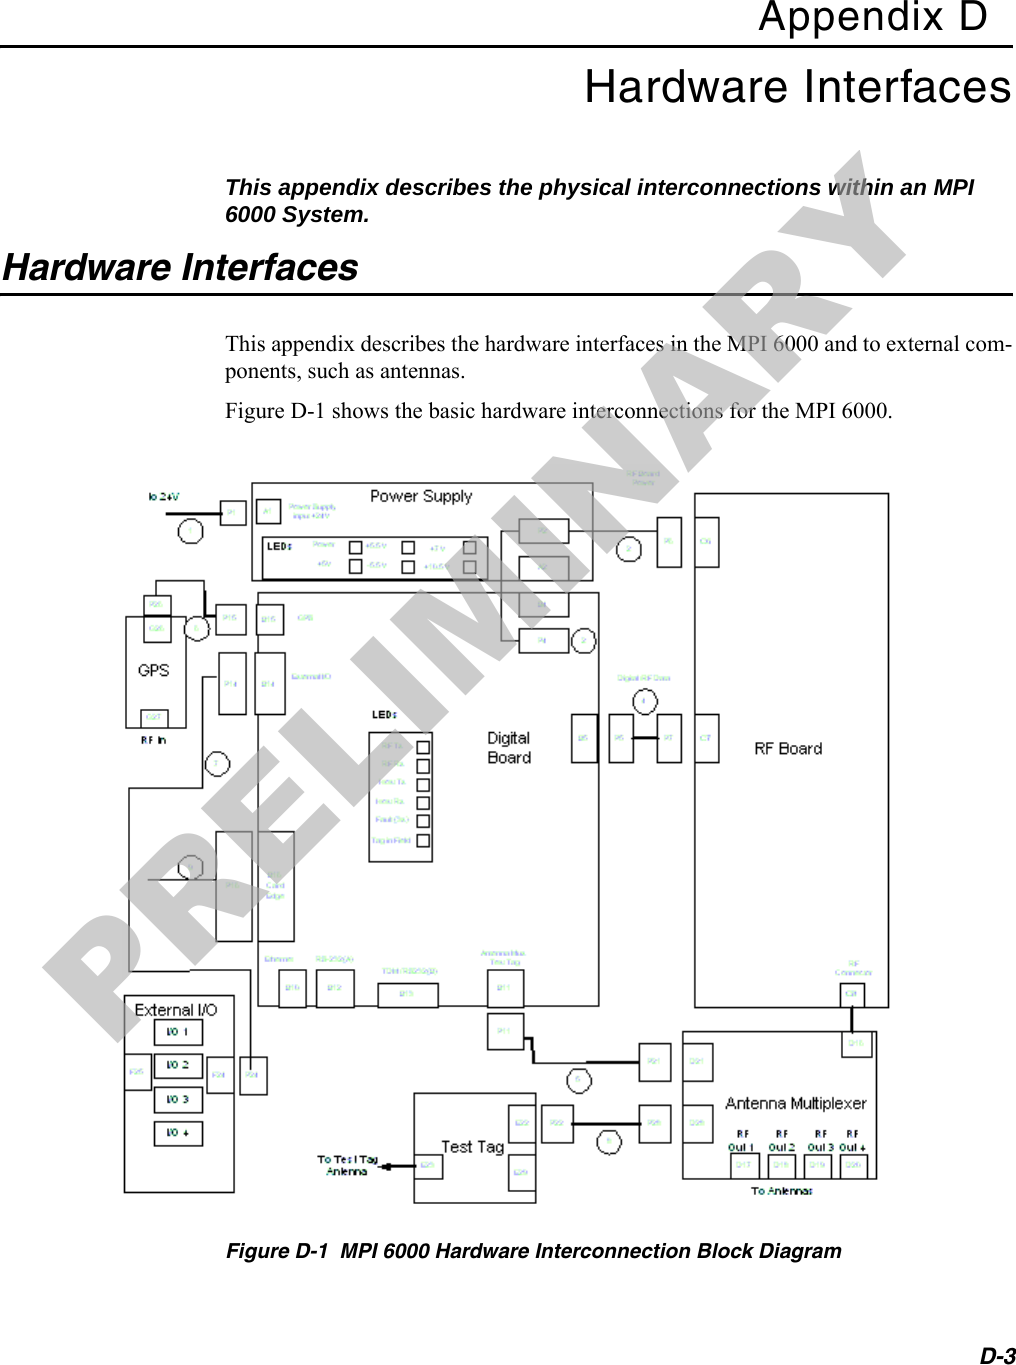 D-3Appendix DHardware InterfacesThis appendix describes the physical interconnections within an MPI 6000 System.Hardware InterfacesThis appendix describes the hardware interfaces in the MPI 6000 and to external com-ponents, such as antennas.Figure D-1 shows the basic hardware interconnections for the MPI 6000.Figure D-1  MPI 6000 Hardware Interconnection Block DiagramPRELIMINARY